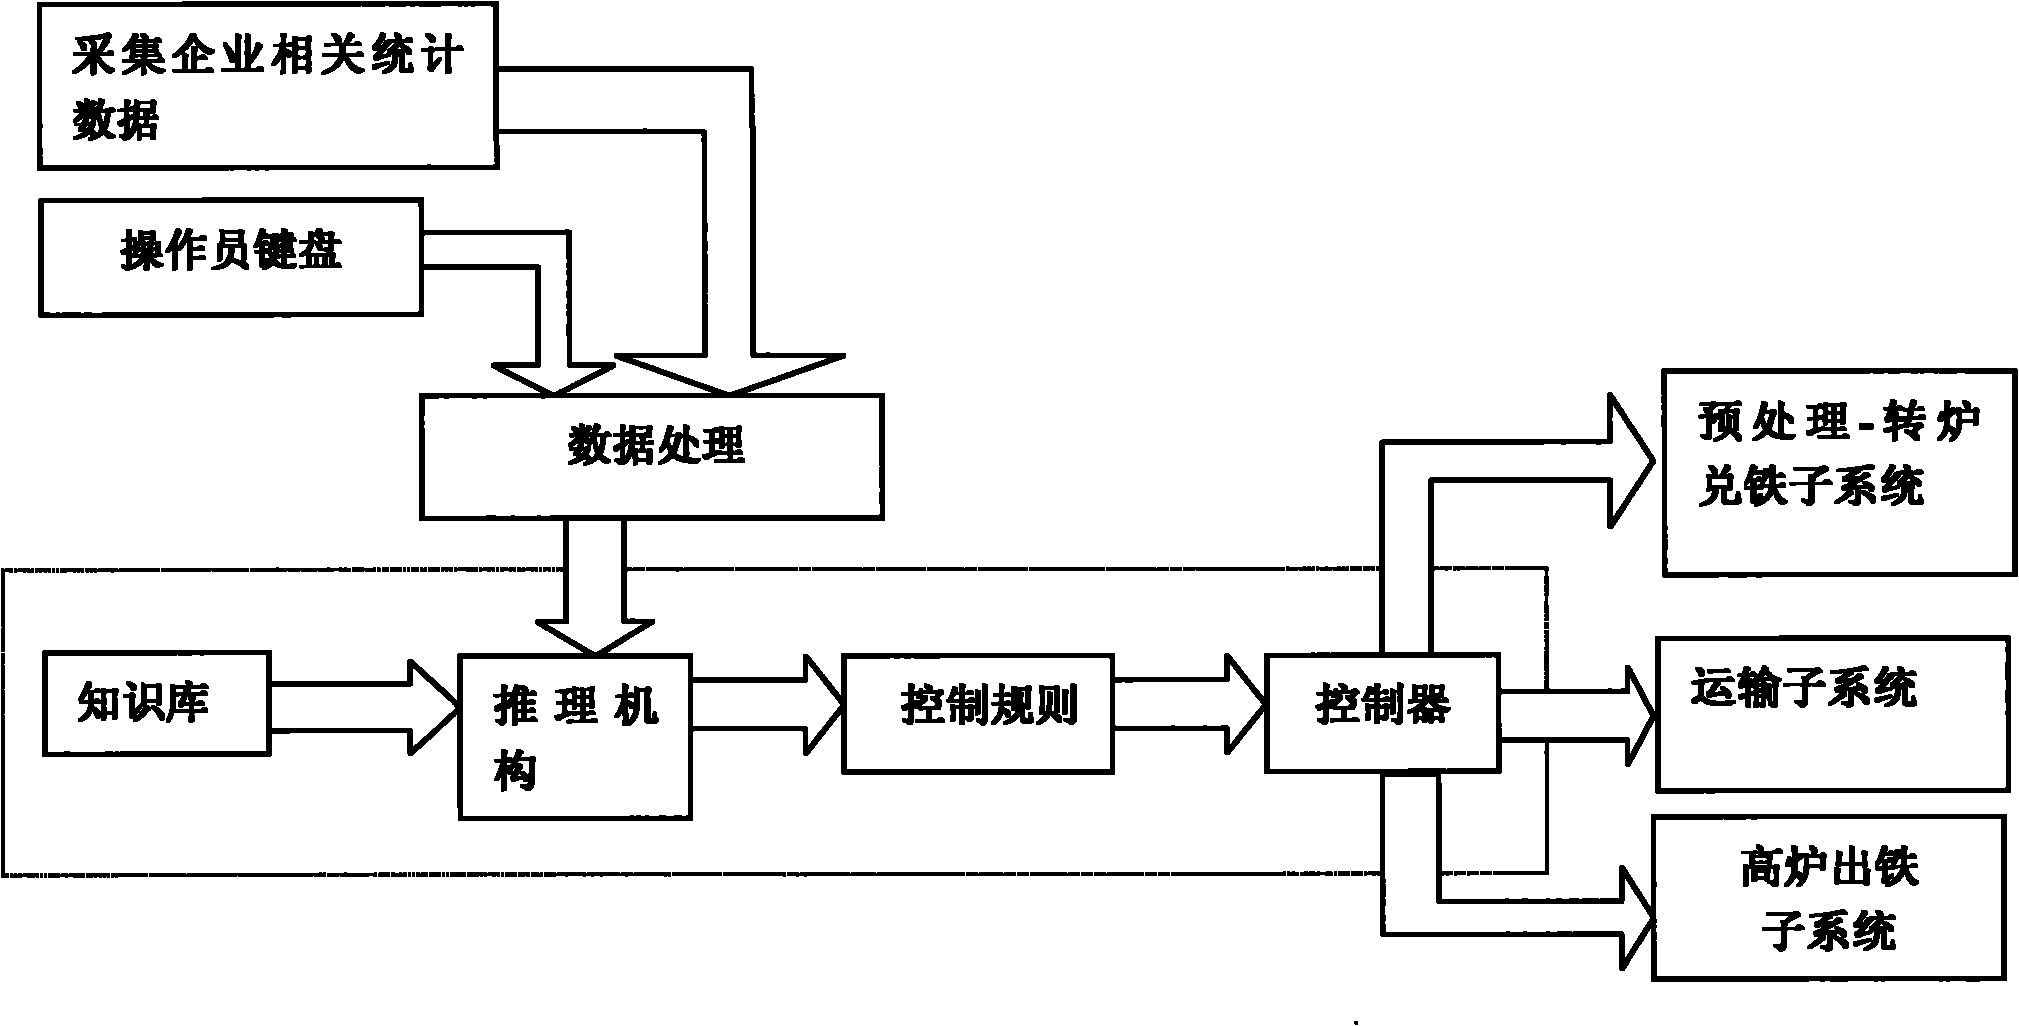 Expert system and control method applied to blast furnace-converter sector production scheduling process control of steel enterprises